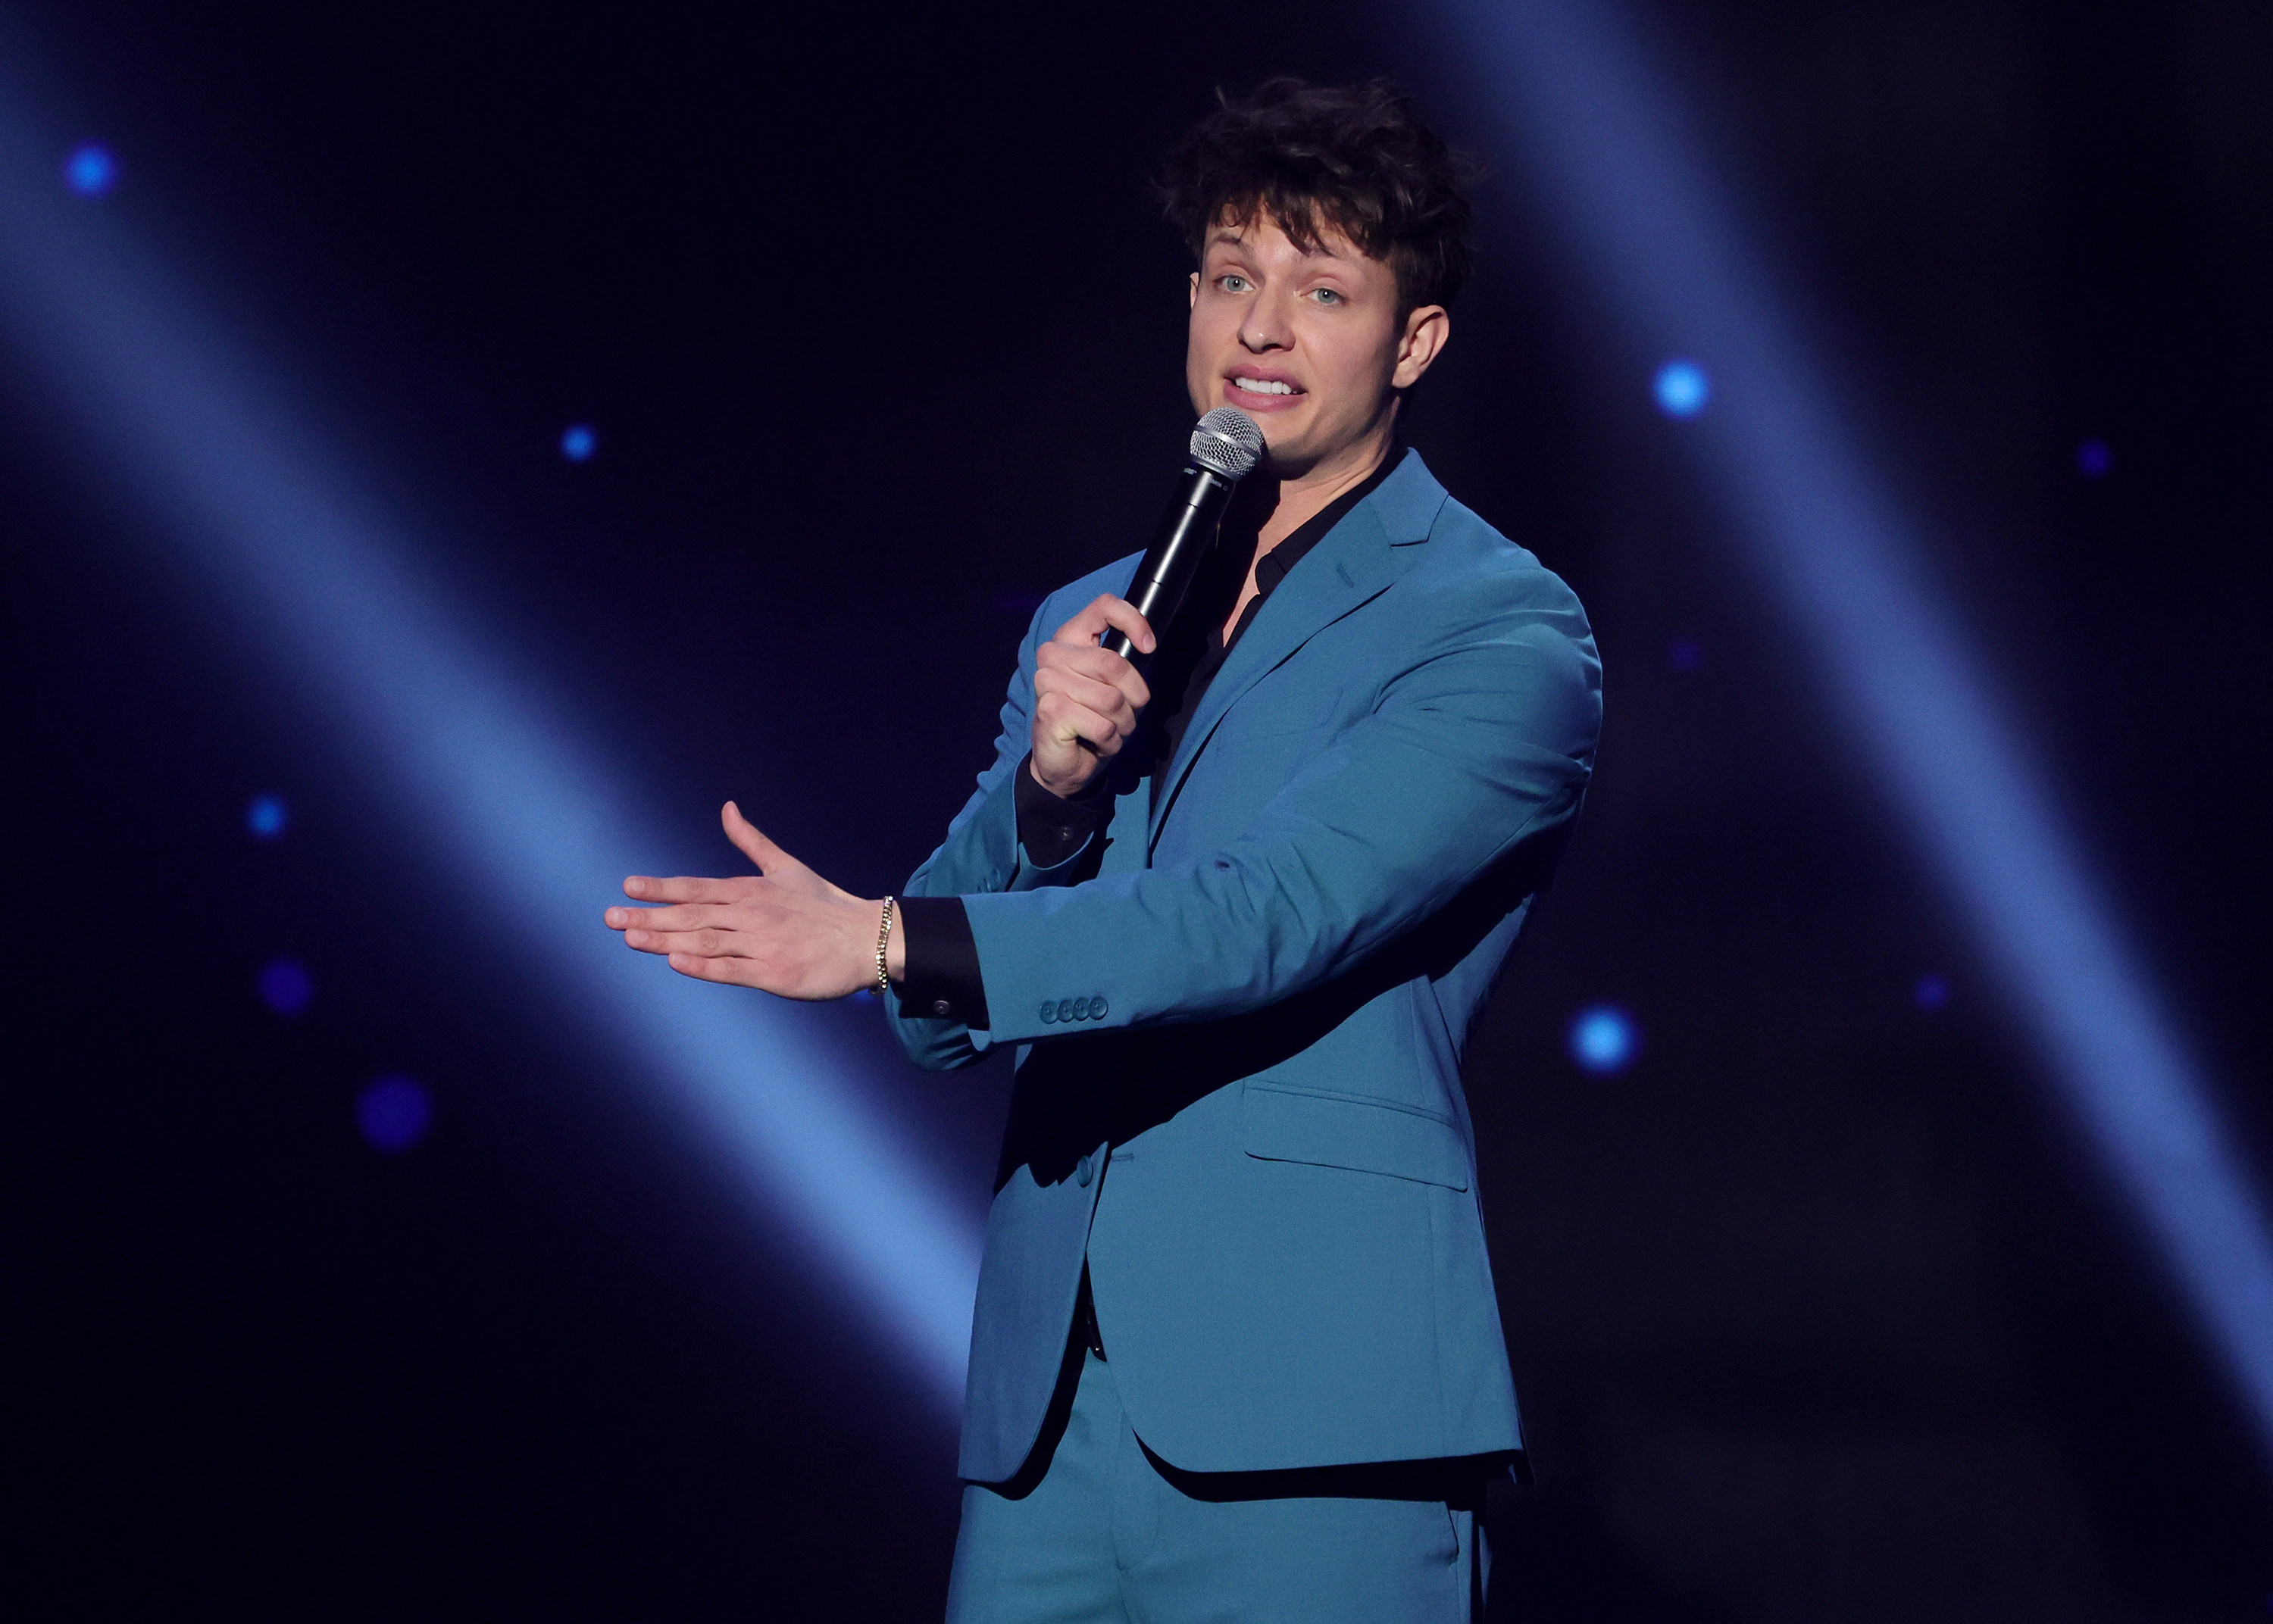 Matt Rife on stage in Las Vegas in January 2023. After going viral on TikTok, the American comic landed his own Netflix special and is now in the middle of a sold-out world tour. Photo: Getty images